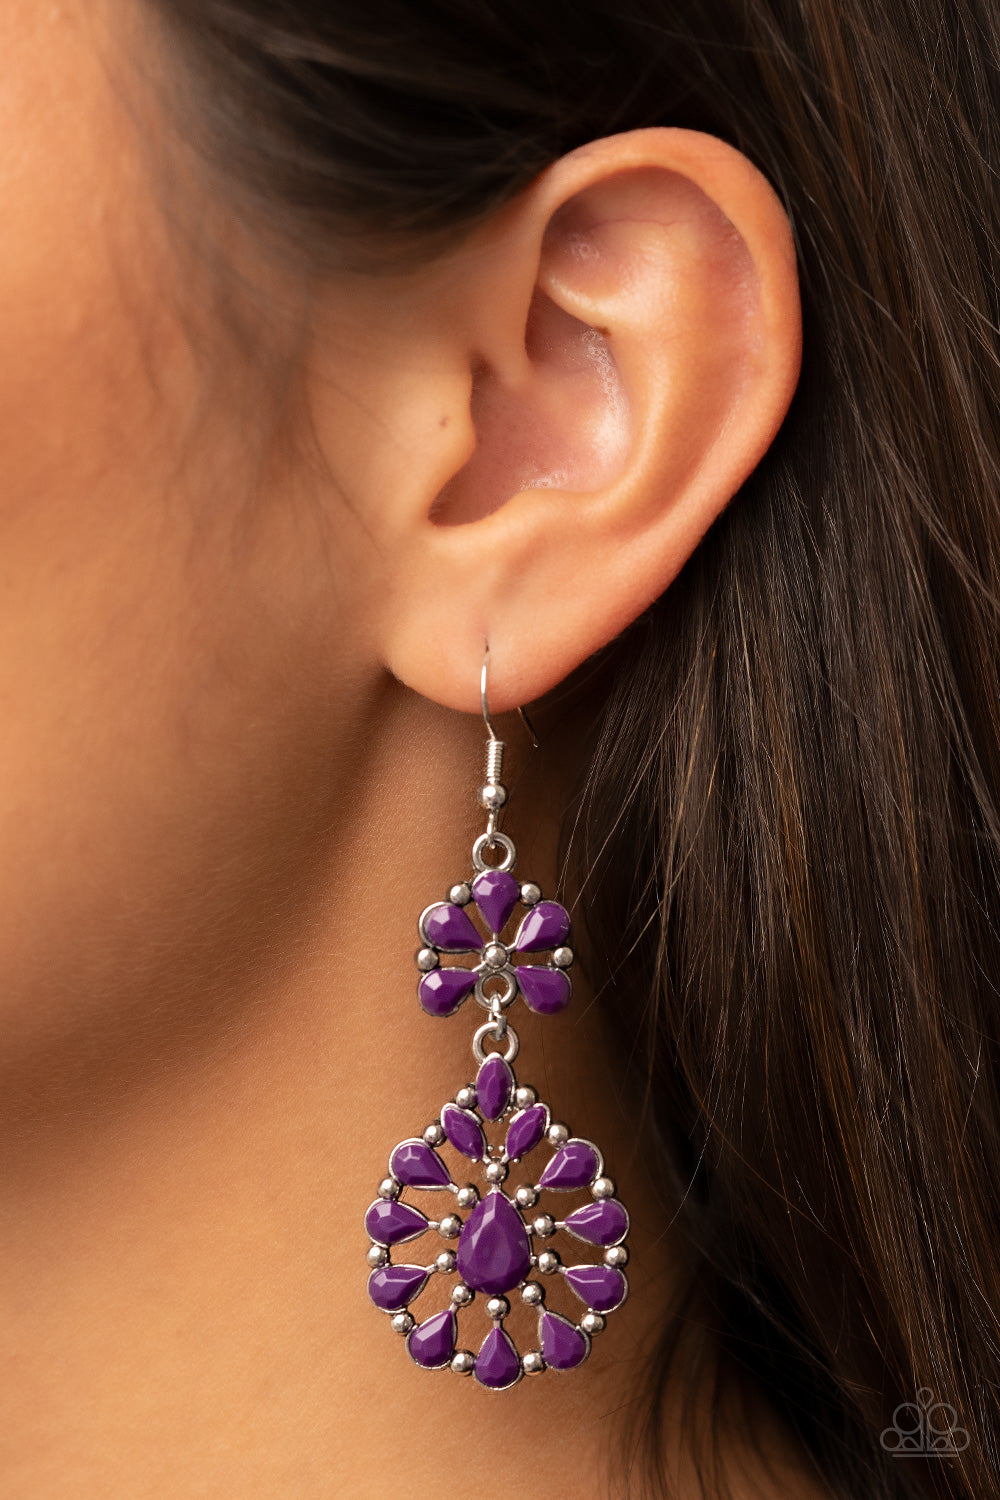 Posh Palooza - Plum Purple and Silver Earrings - Paparazzi Accessories - Two plum beaded and silver studded frames delicately link into a vivacious lure, creating a colorful pop of floral inspiration. Earring attaches to a standard fishhook fitting.